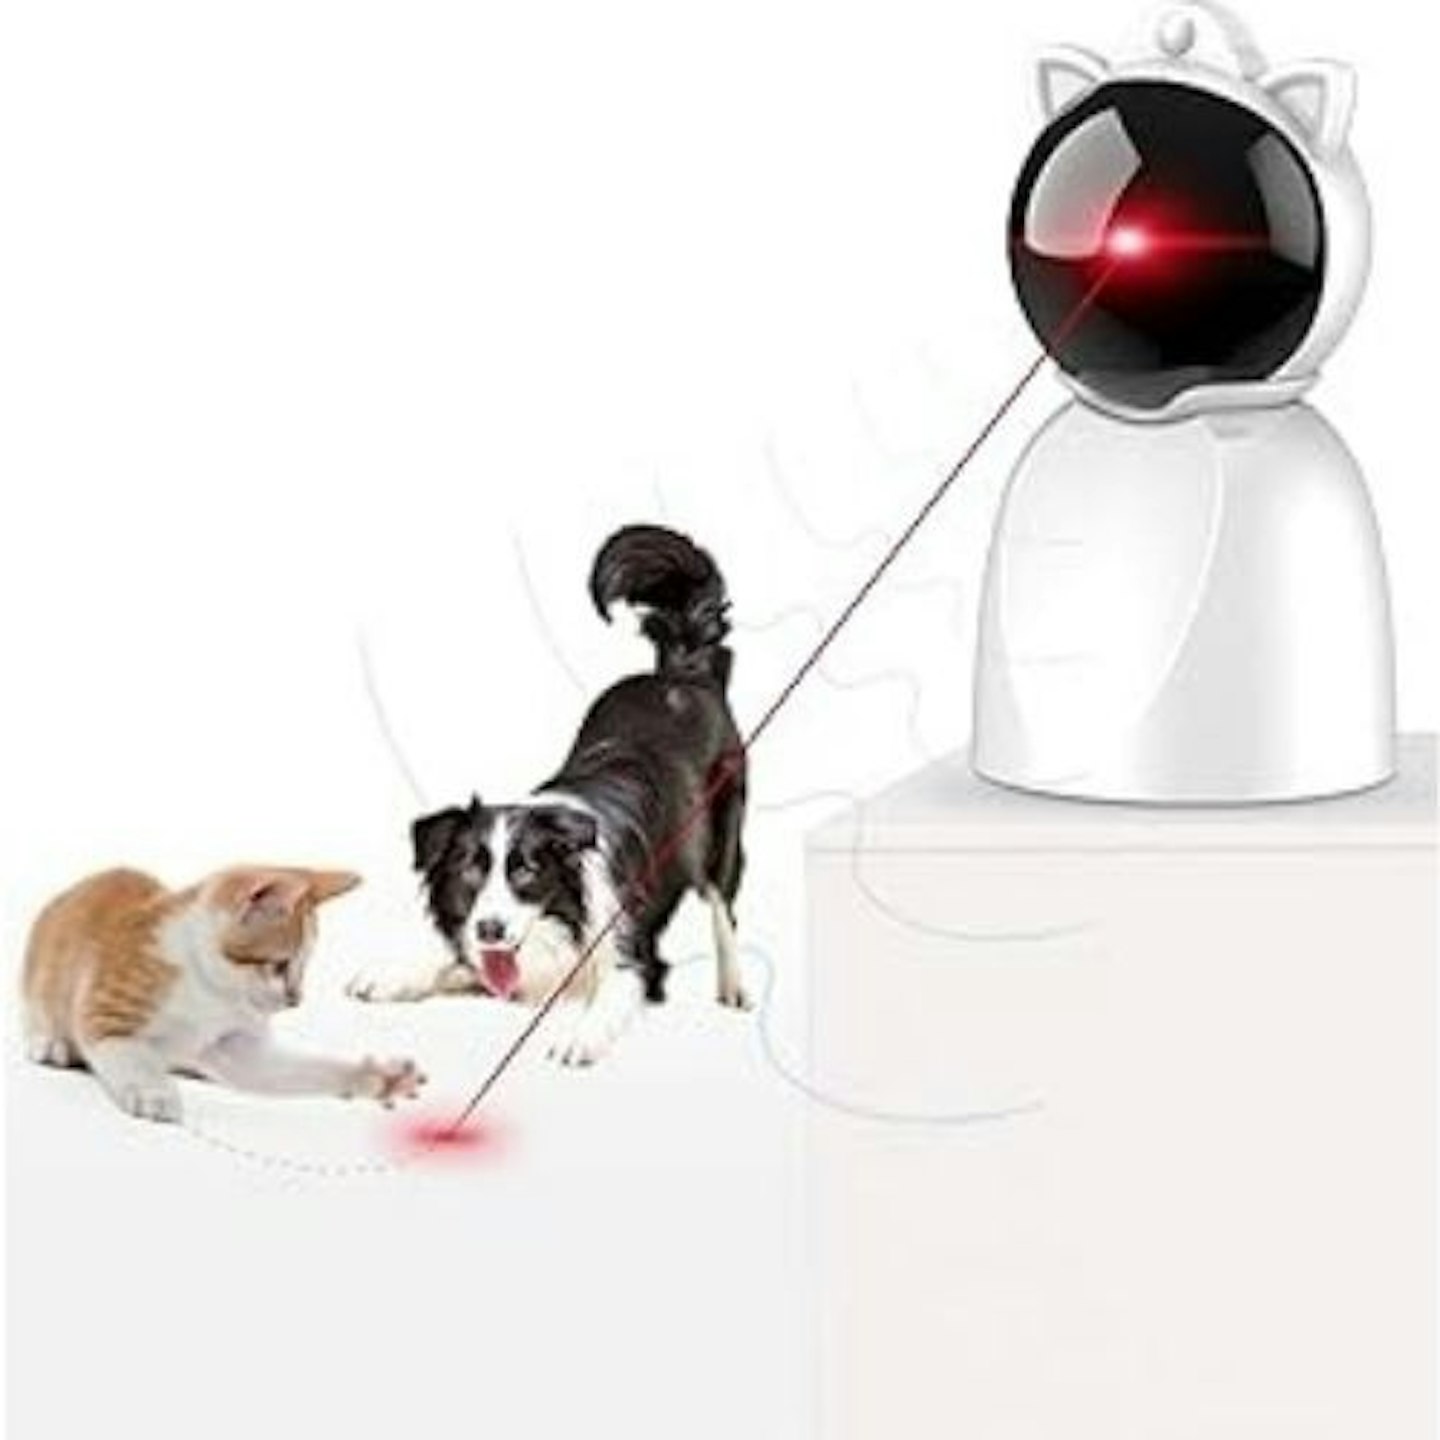 YVE LIFE Laser Toy for Indoor Cats